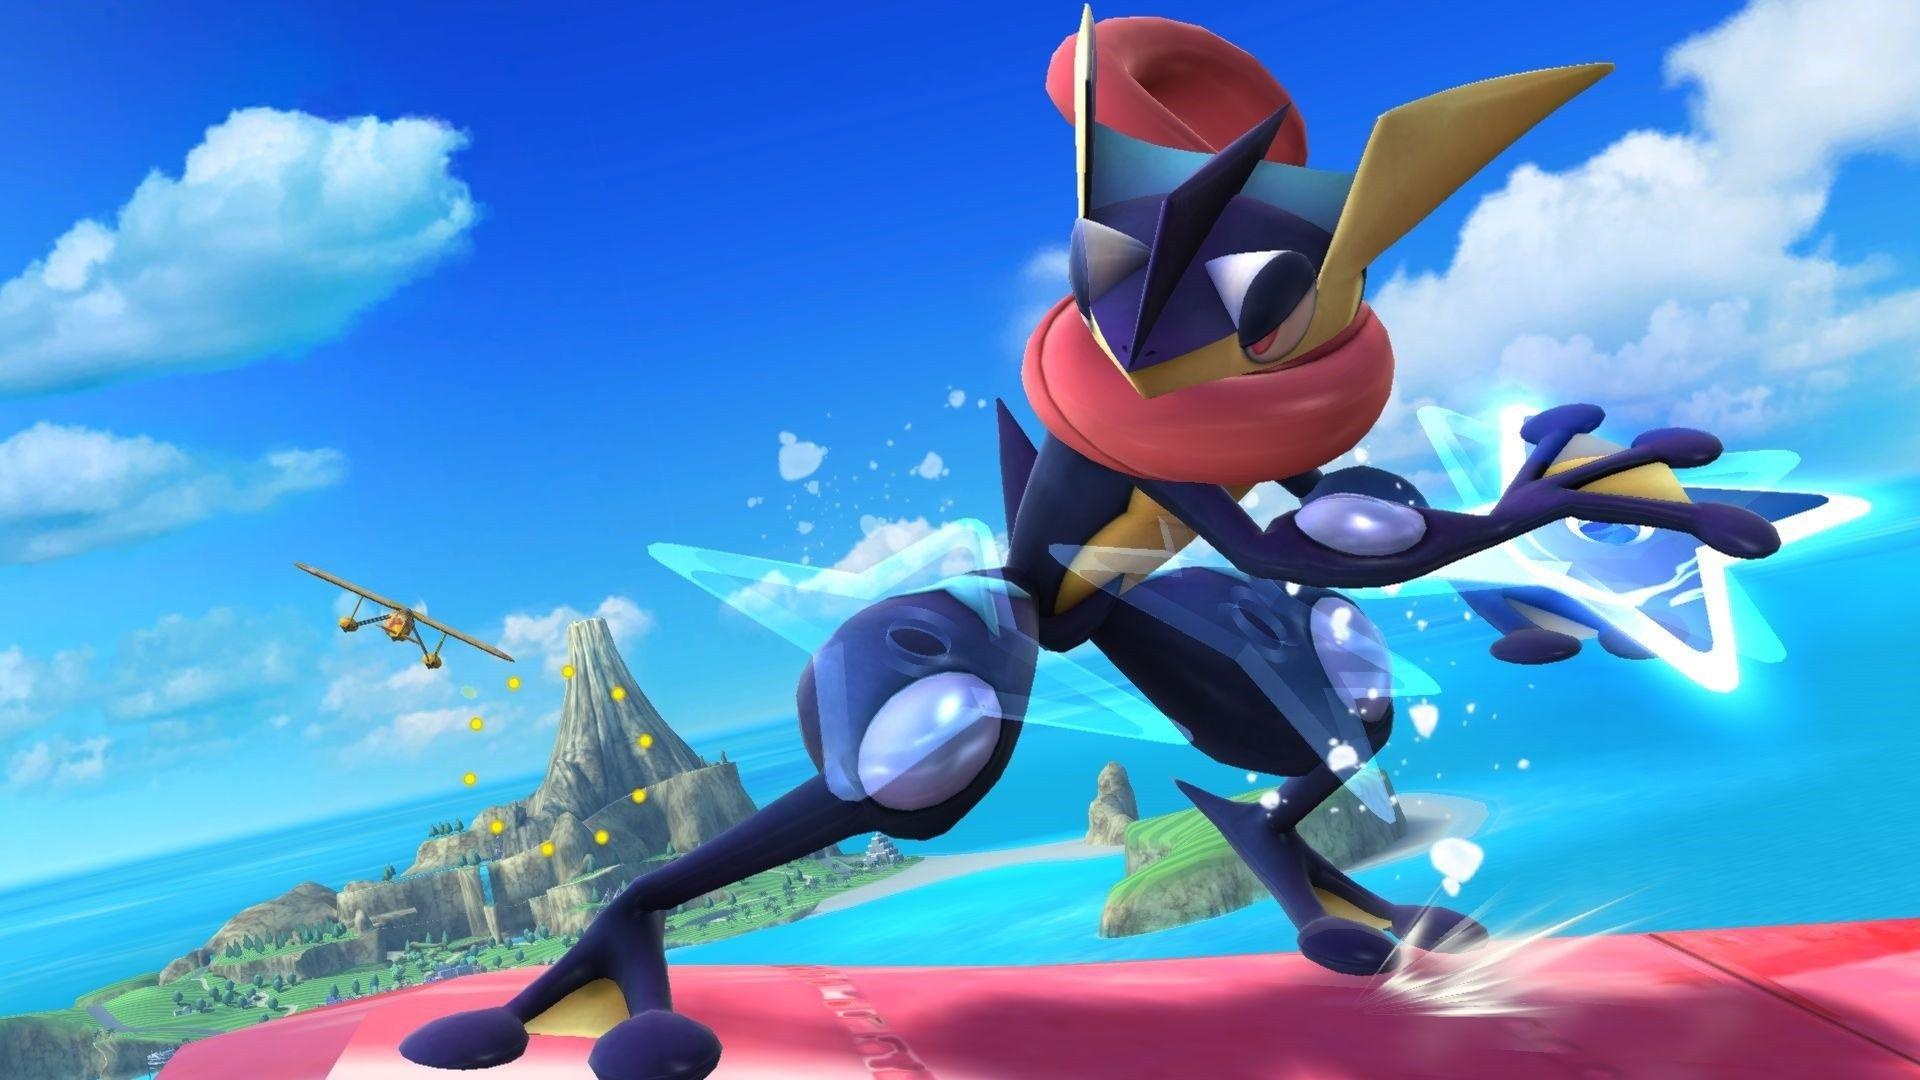 Greninja: Has resistance to Fire, Water, Ice, and Steel-type moves. 1920x1080 Full HD Background.